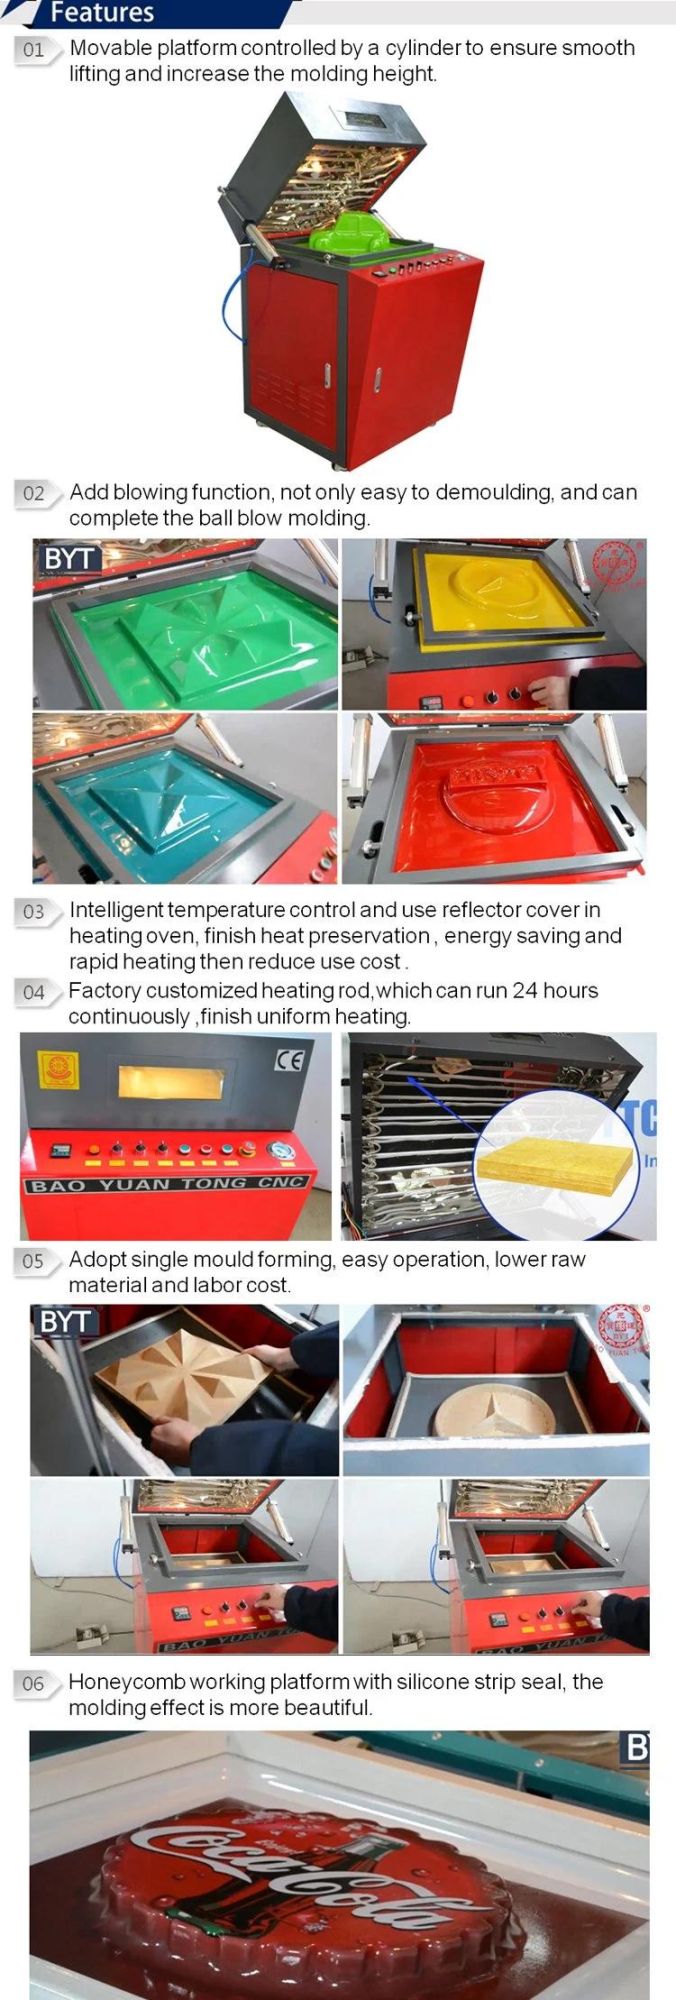 Acrylic Movable DIY Vacuum Former Forming Machine